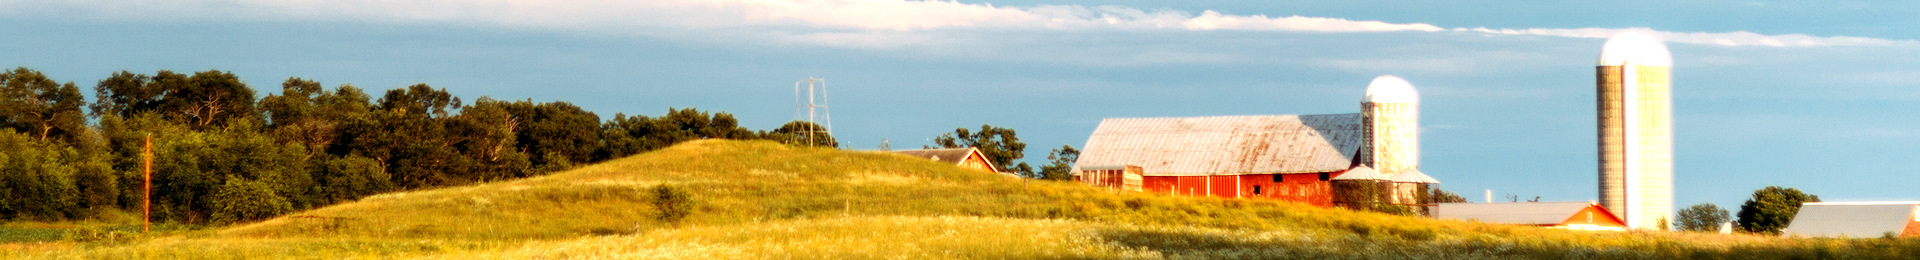 Photograph: Rural Landscape with Barn